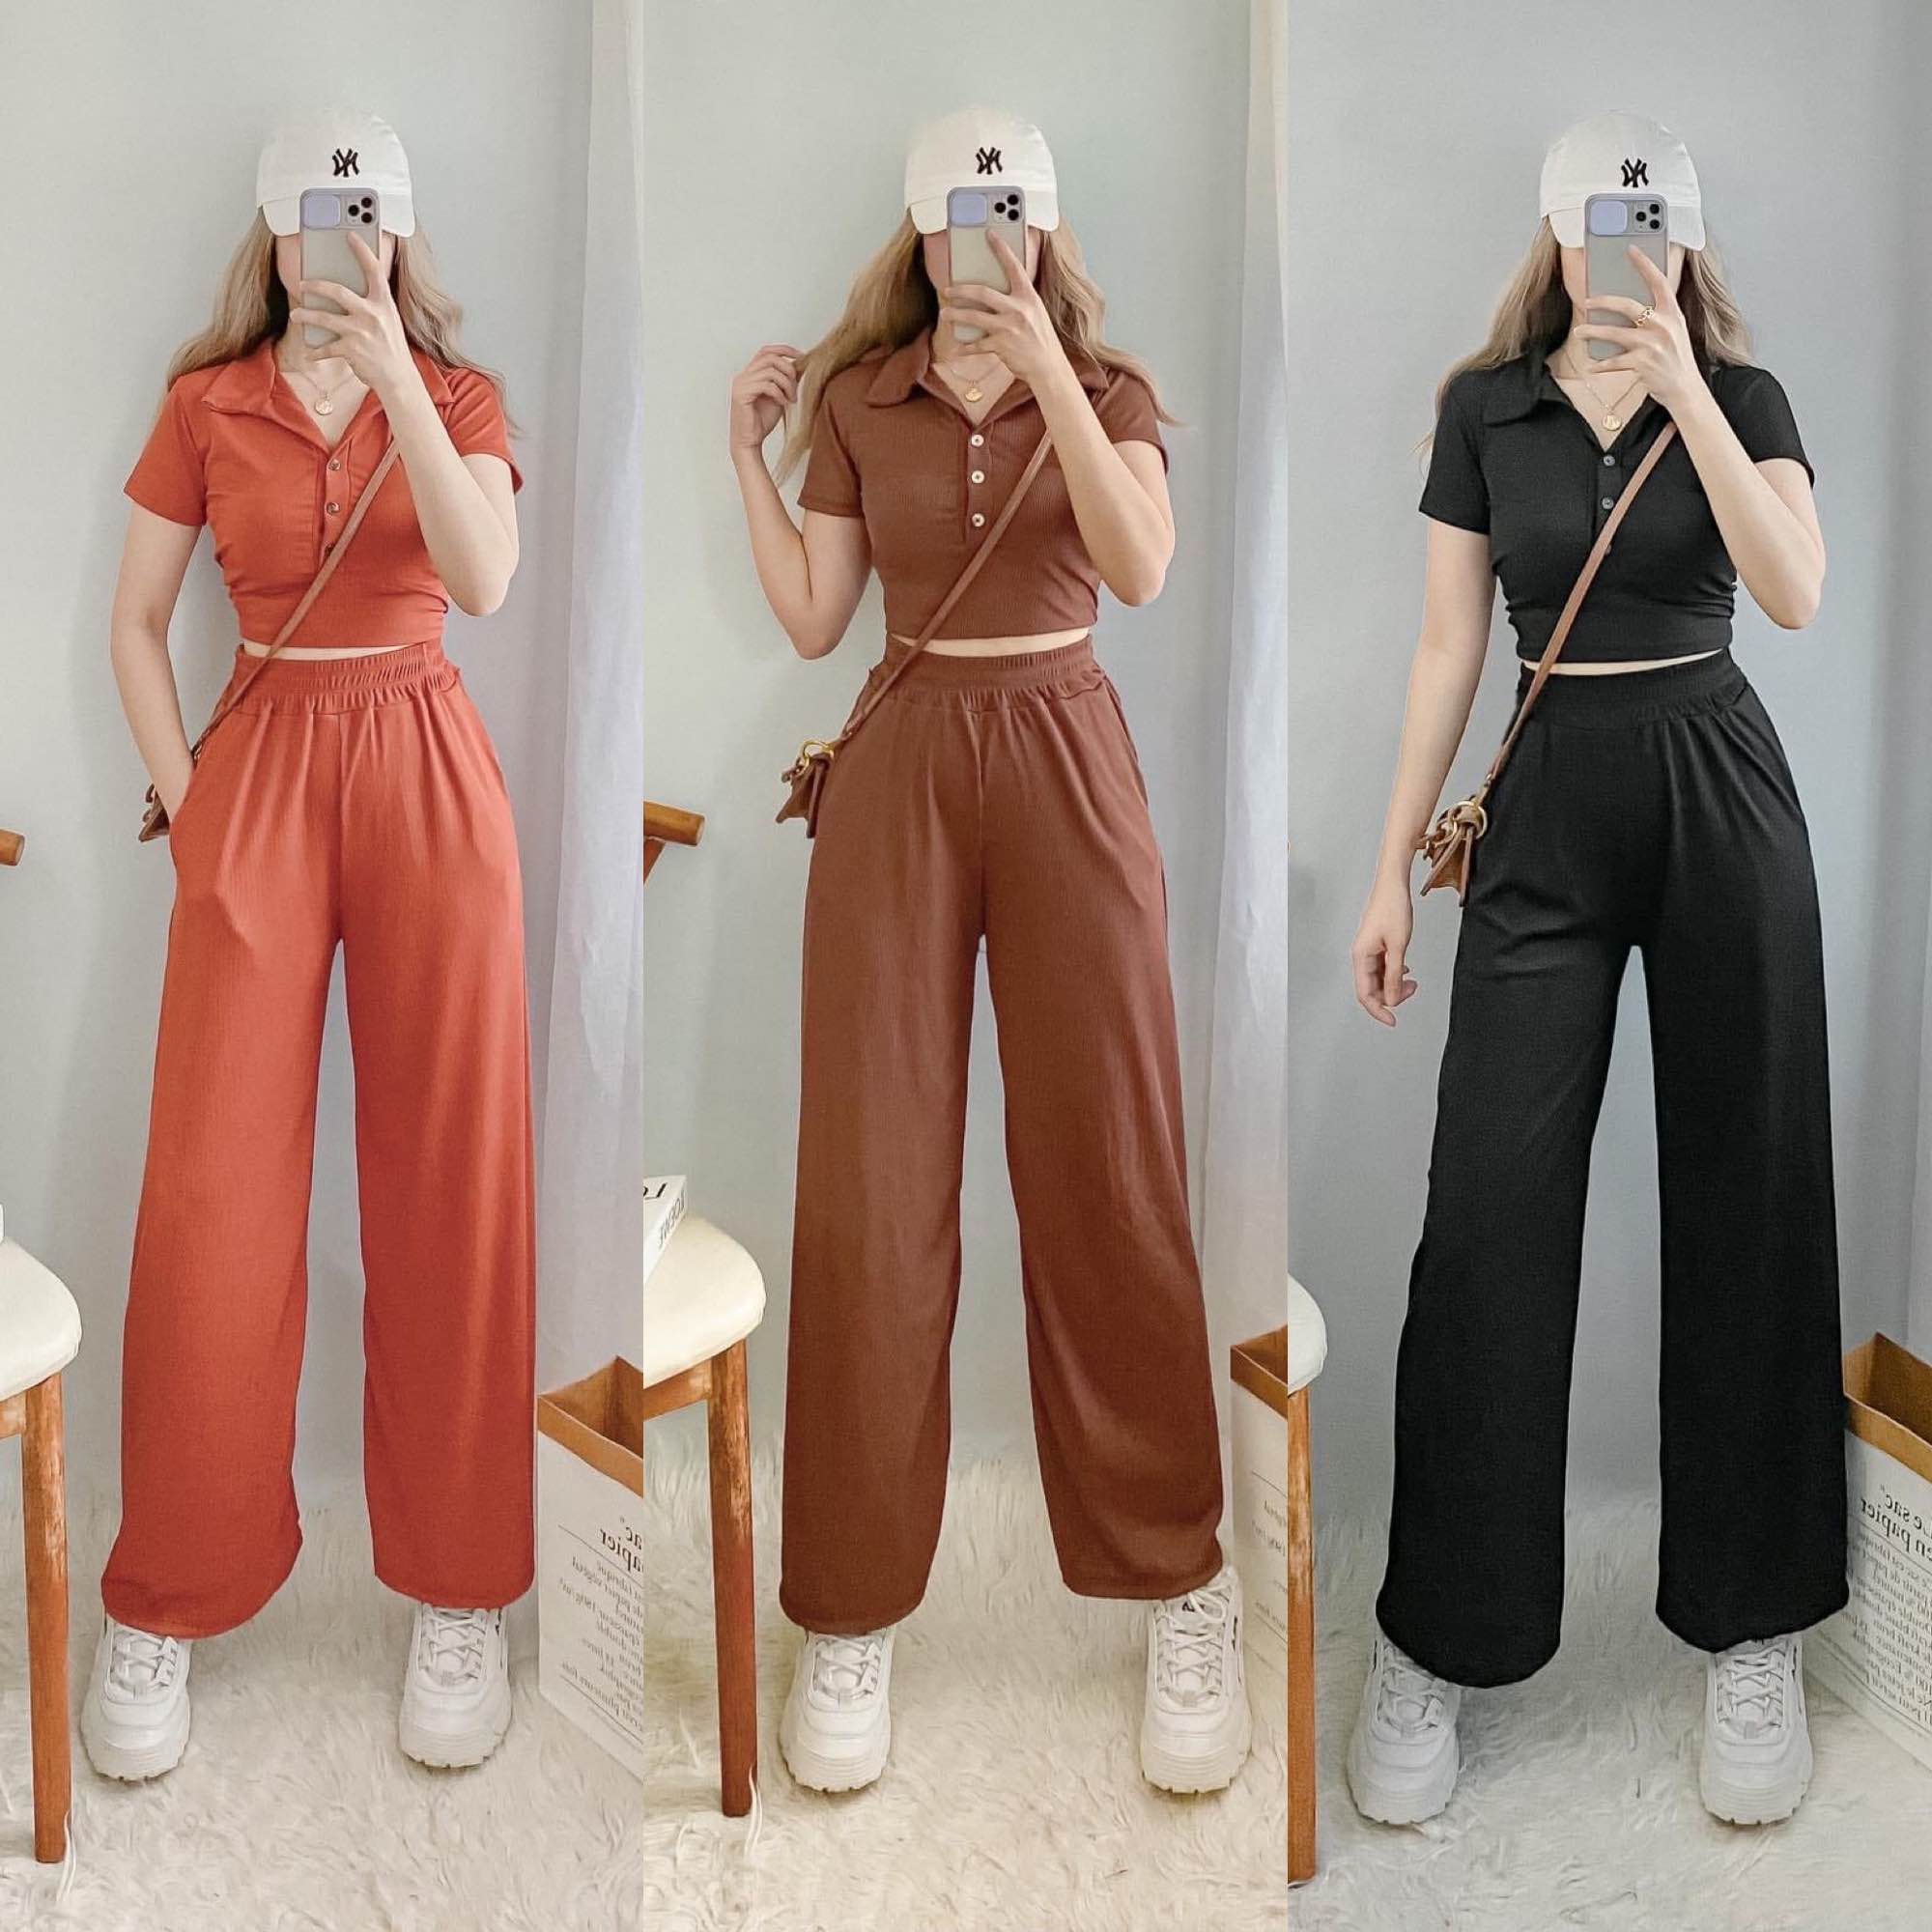 pin: thelornamorris '  Cute simple outfits, Body suit outfits